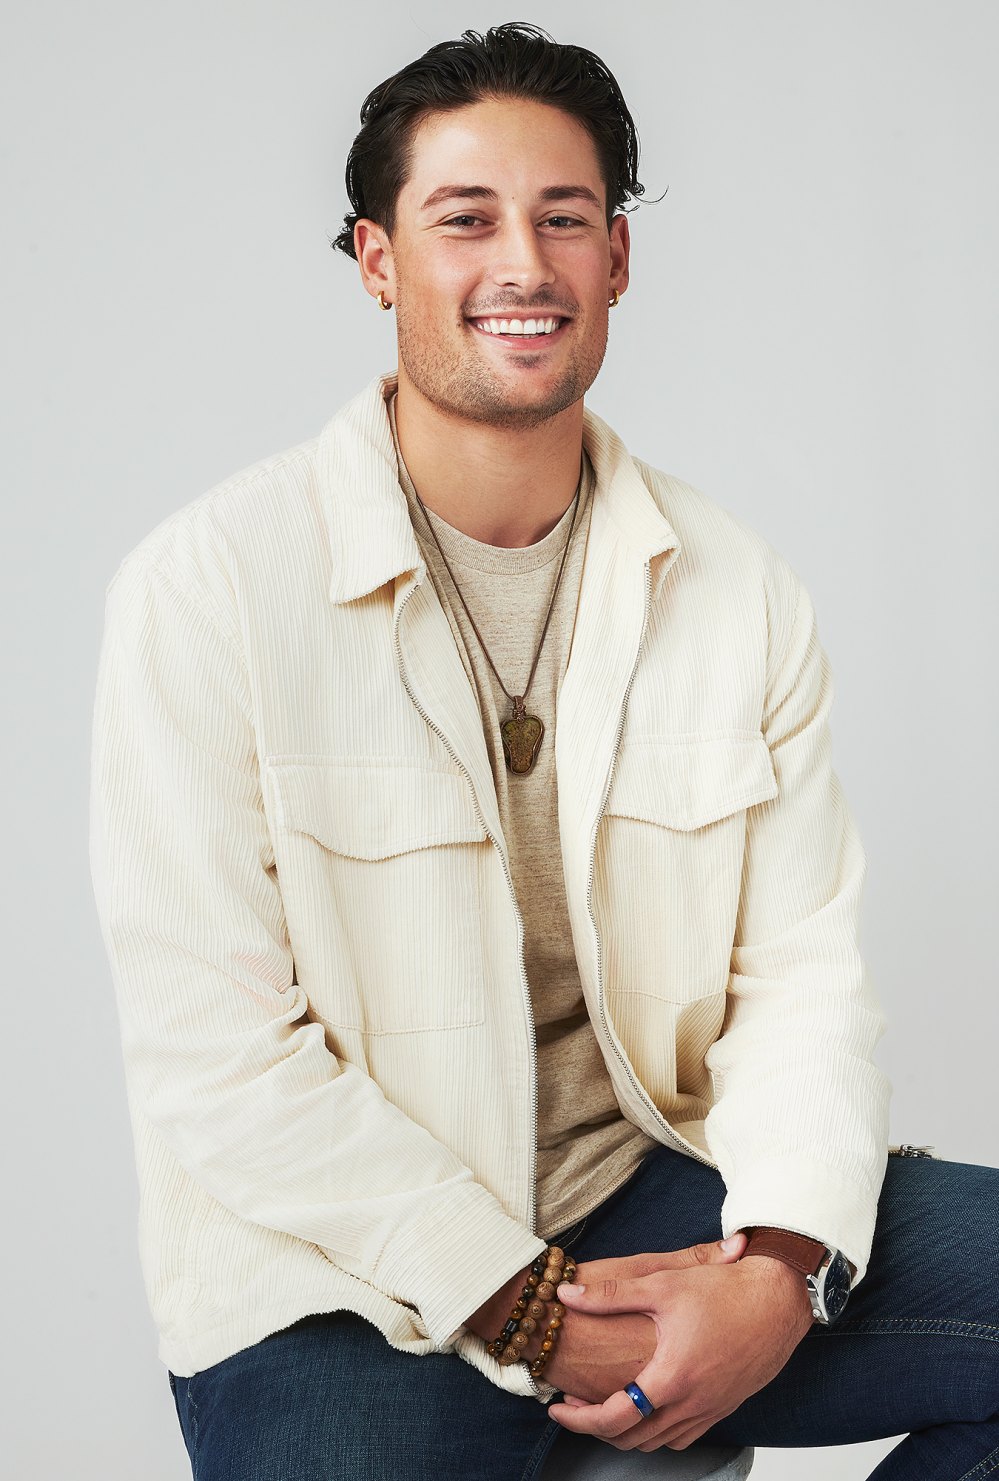 Who Is Brayden Bowers? 5 Things to Know About the 'Bachelorette' Season 20 Contestant